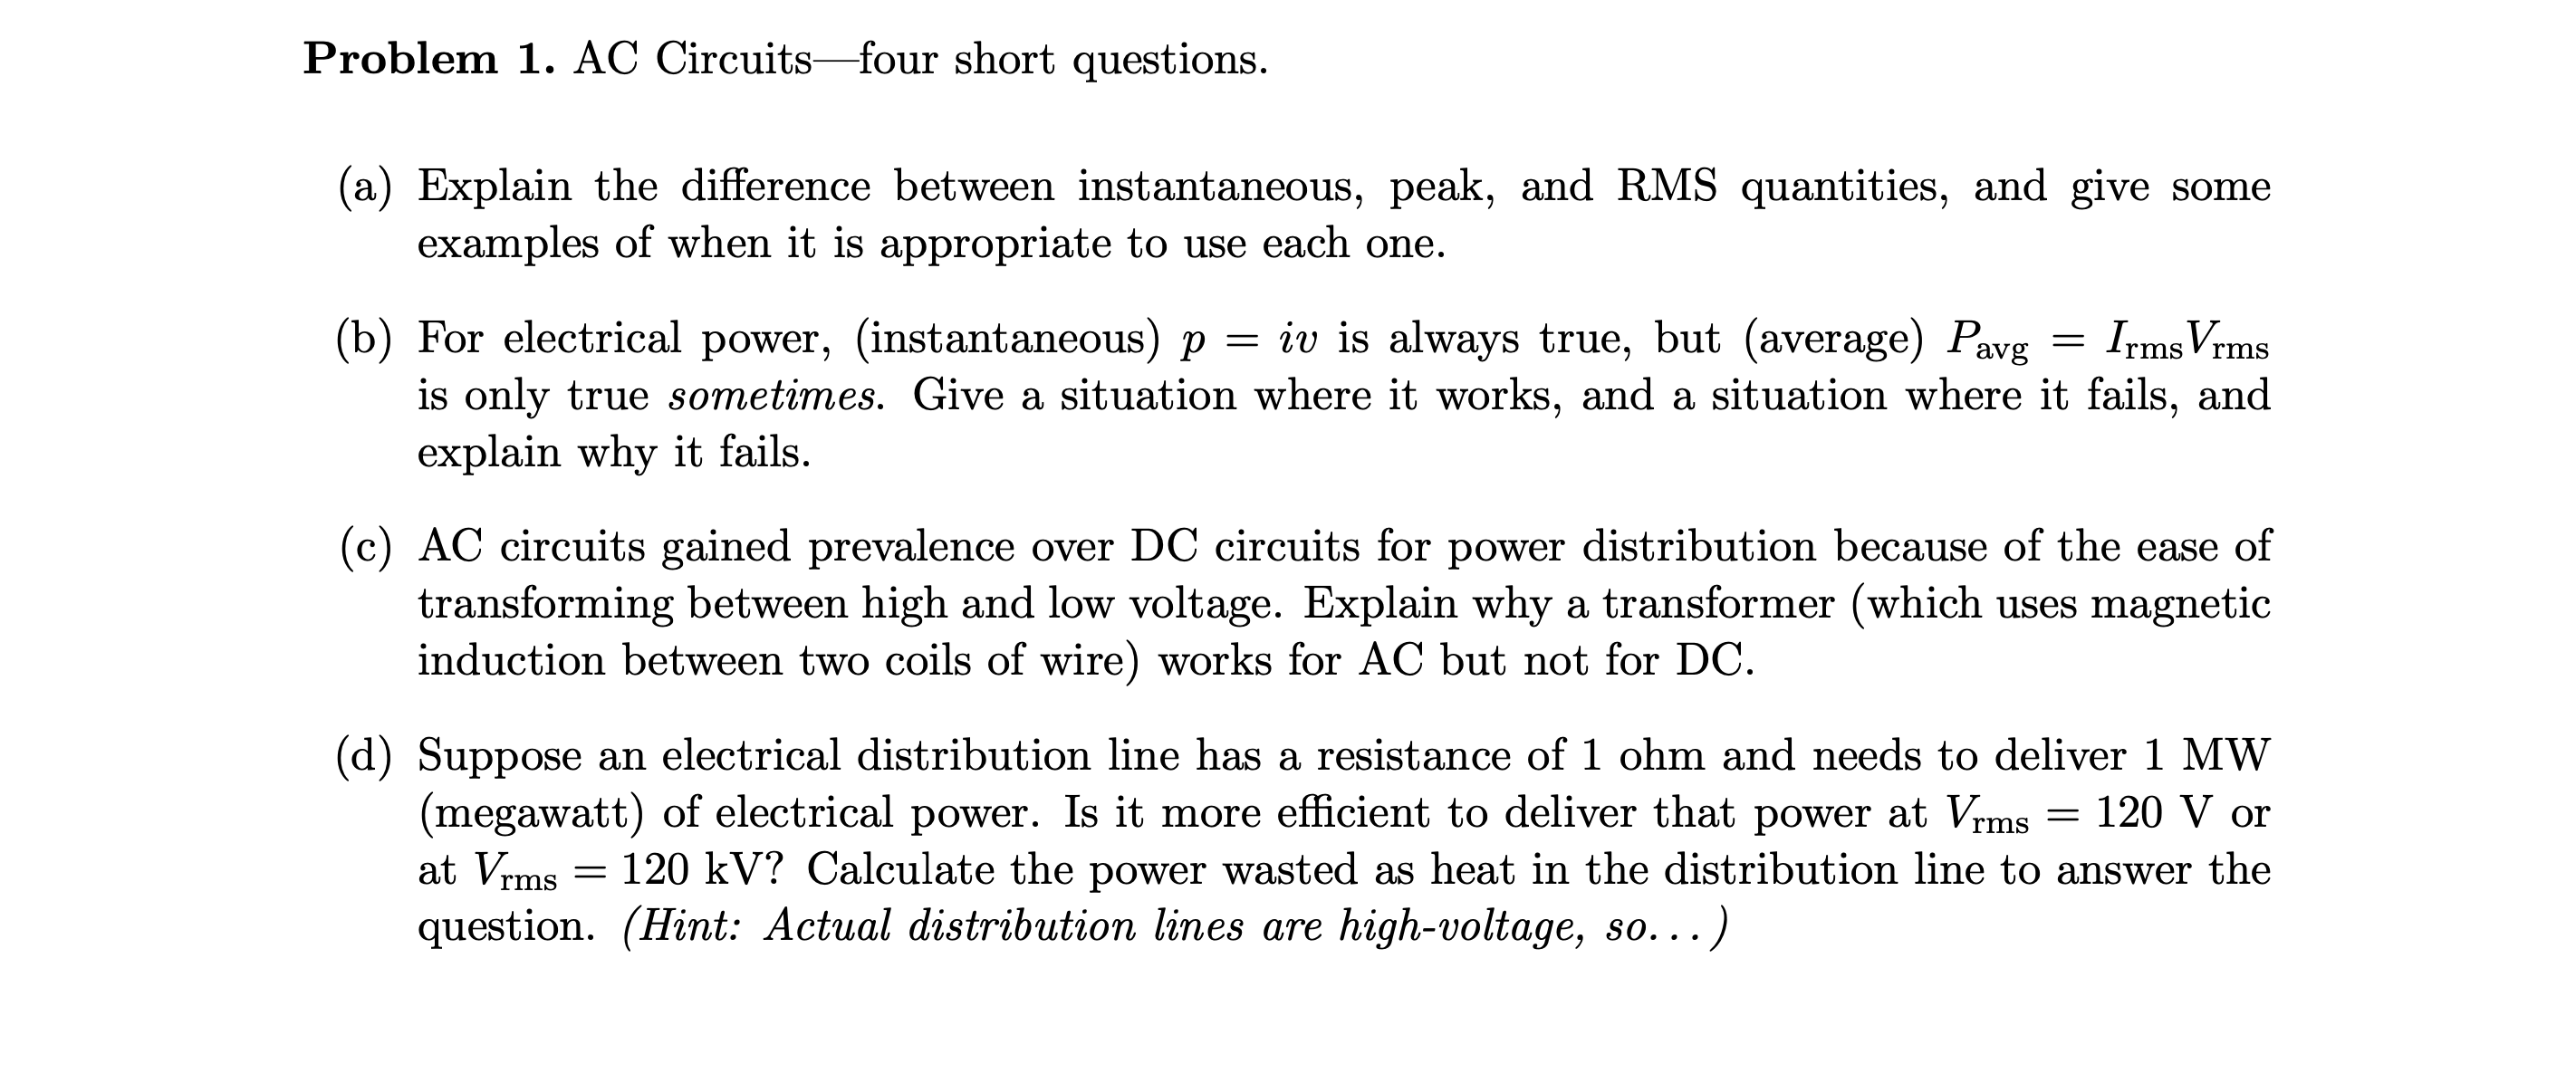 Suppose an electrical distribution line has a resistance of 1 ohm and needs to deliver 1 MW
(megawatt) of electrical power. Is it more efficient to deliver that power at Vrms = 120 V or
at Vrms
120 kV? Calculate the power wasted as heat in the distribution line to answer the
question. (Hint: Actual distribution lines are high-voltage, so...)
